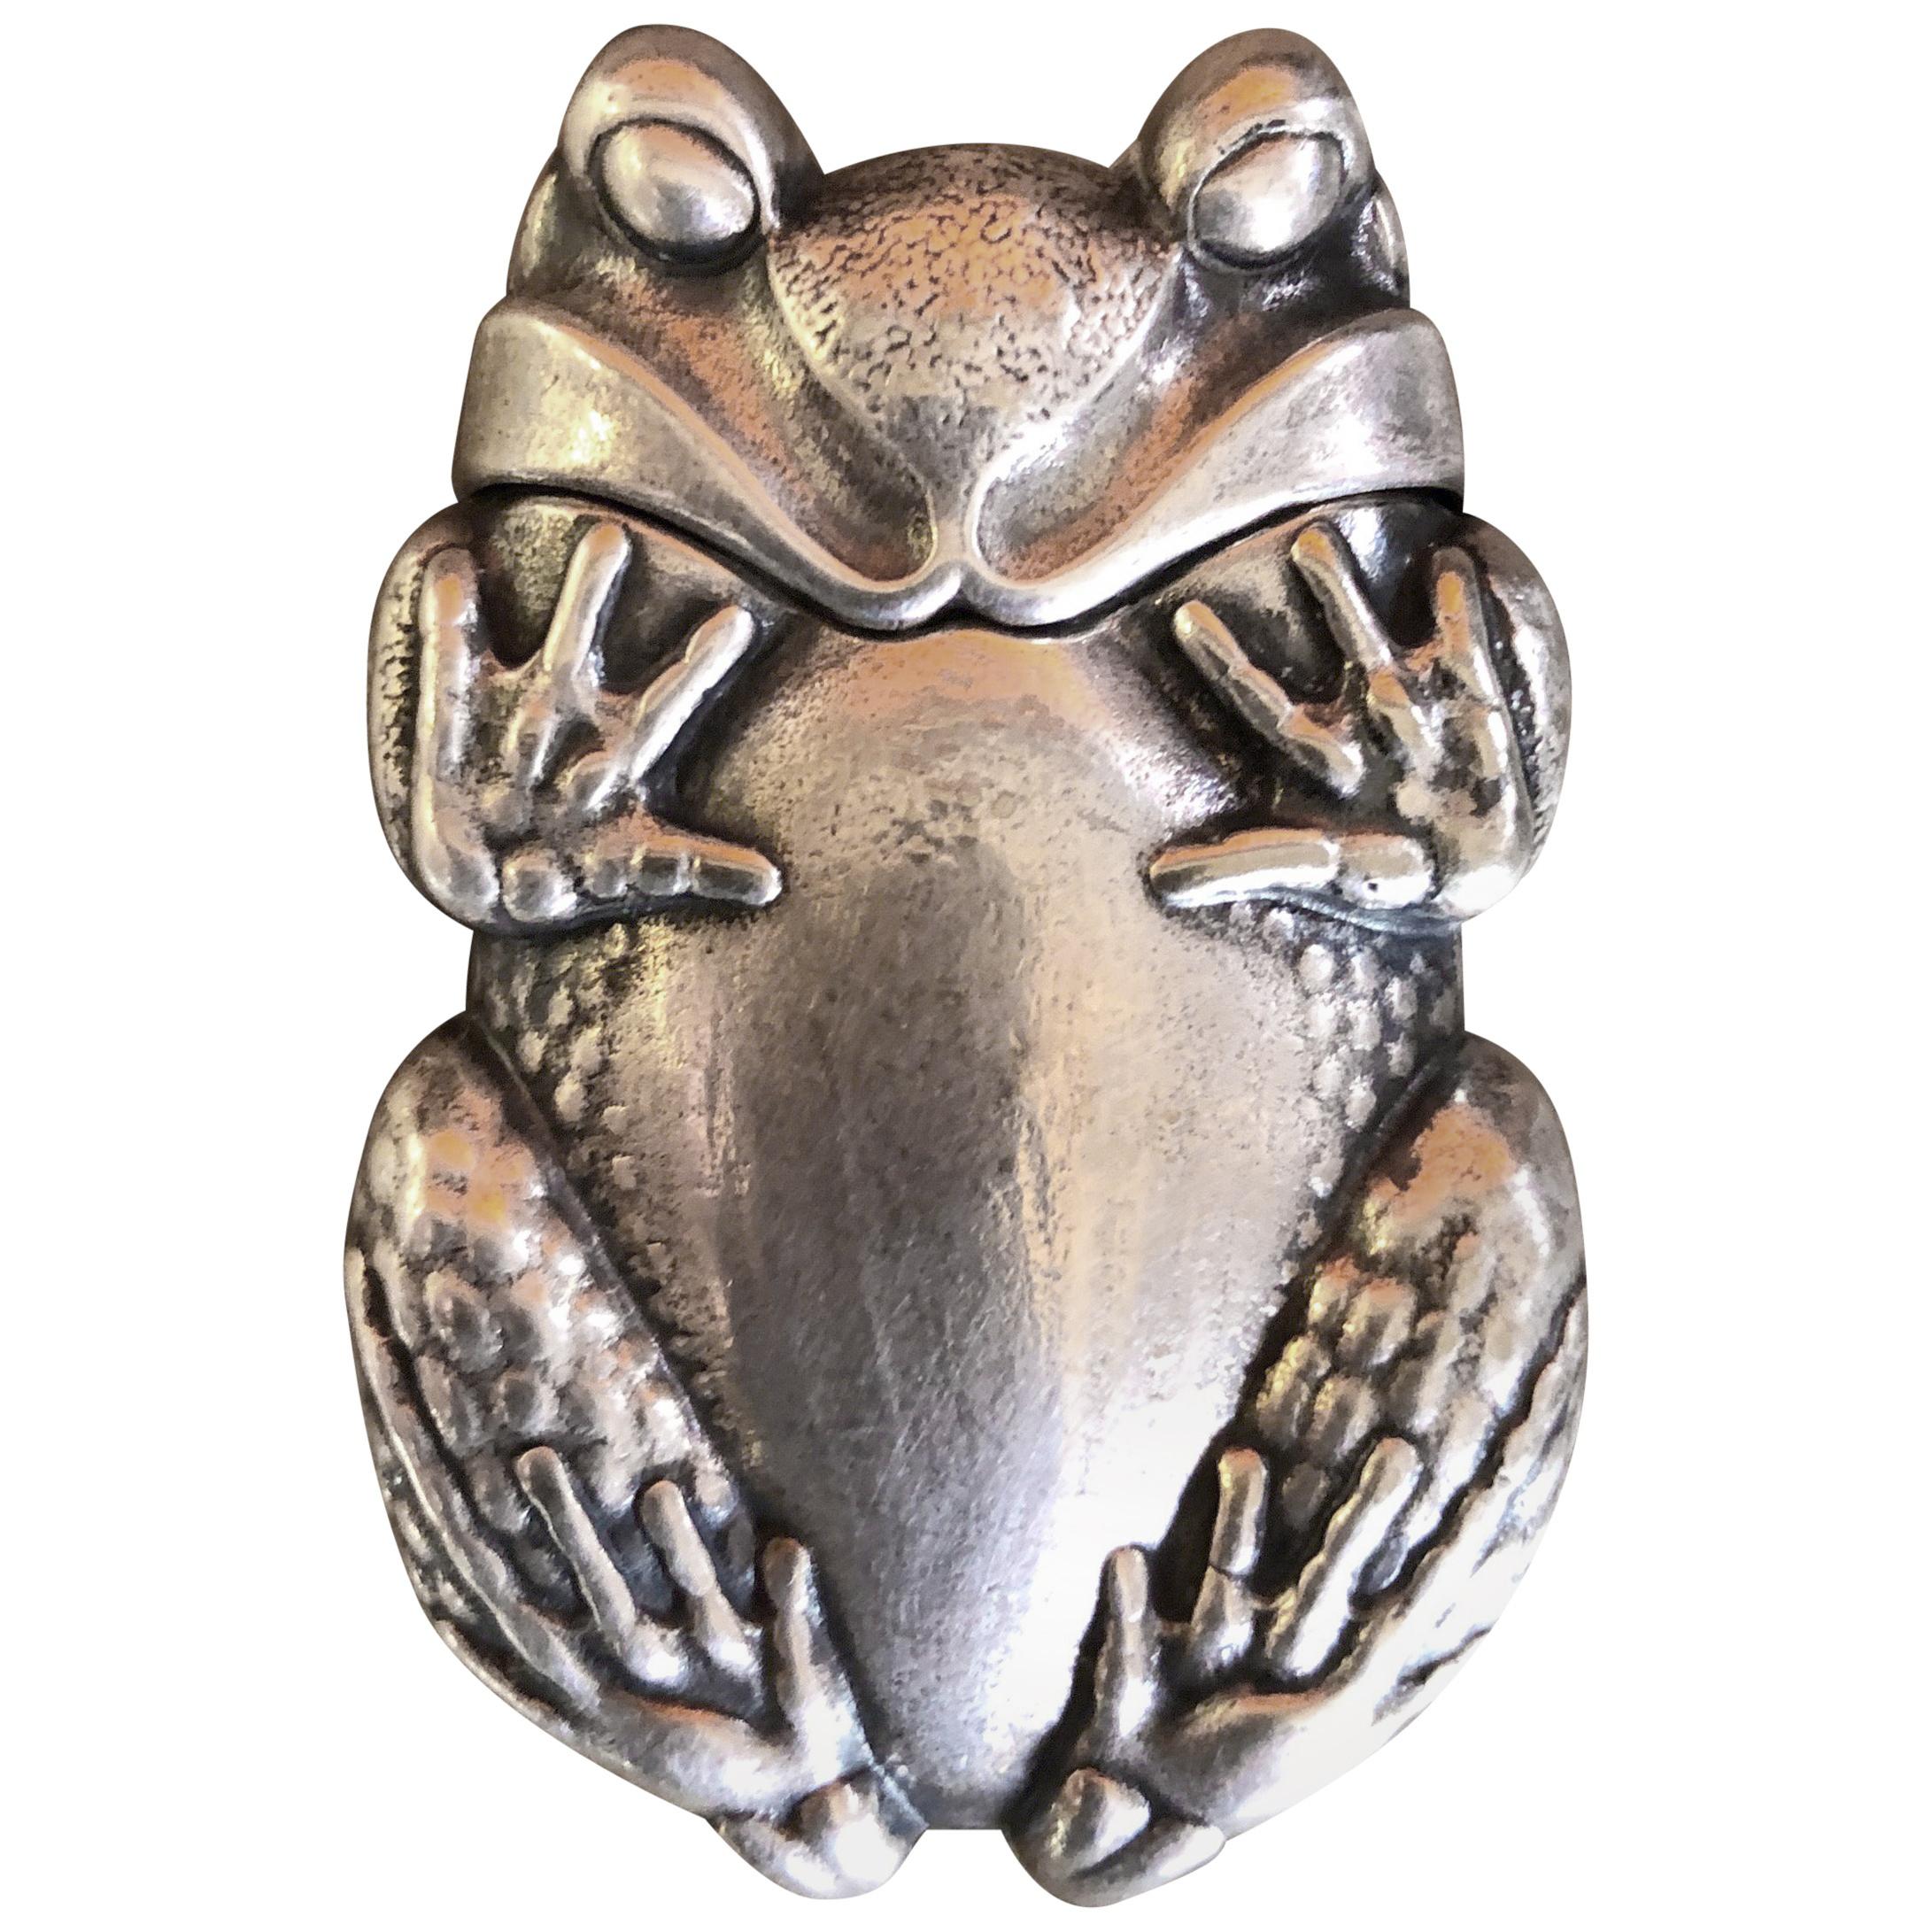 Silver Plated Repousse Frog Form Match Safe by Gorham